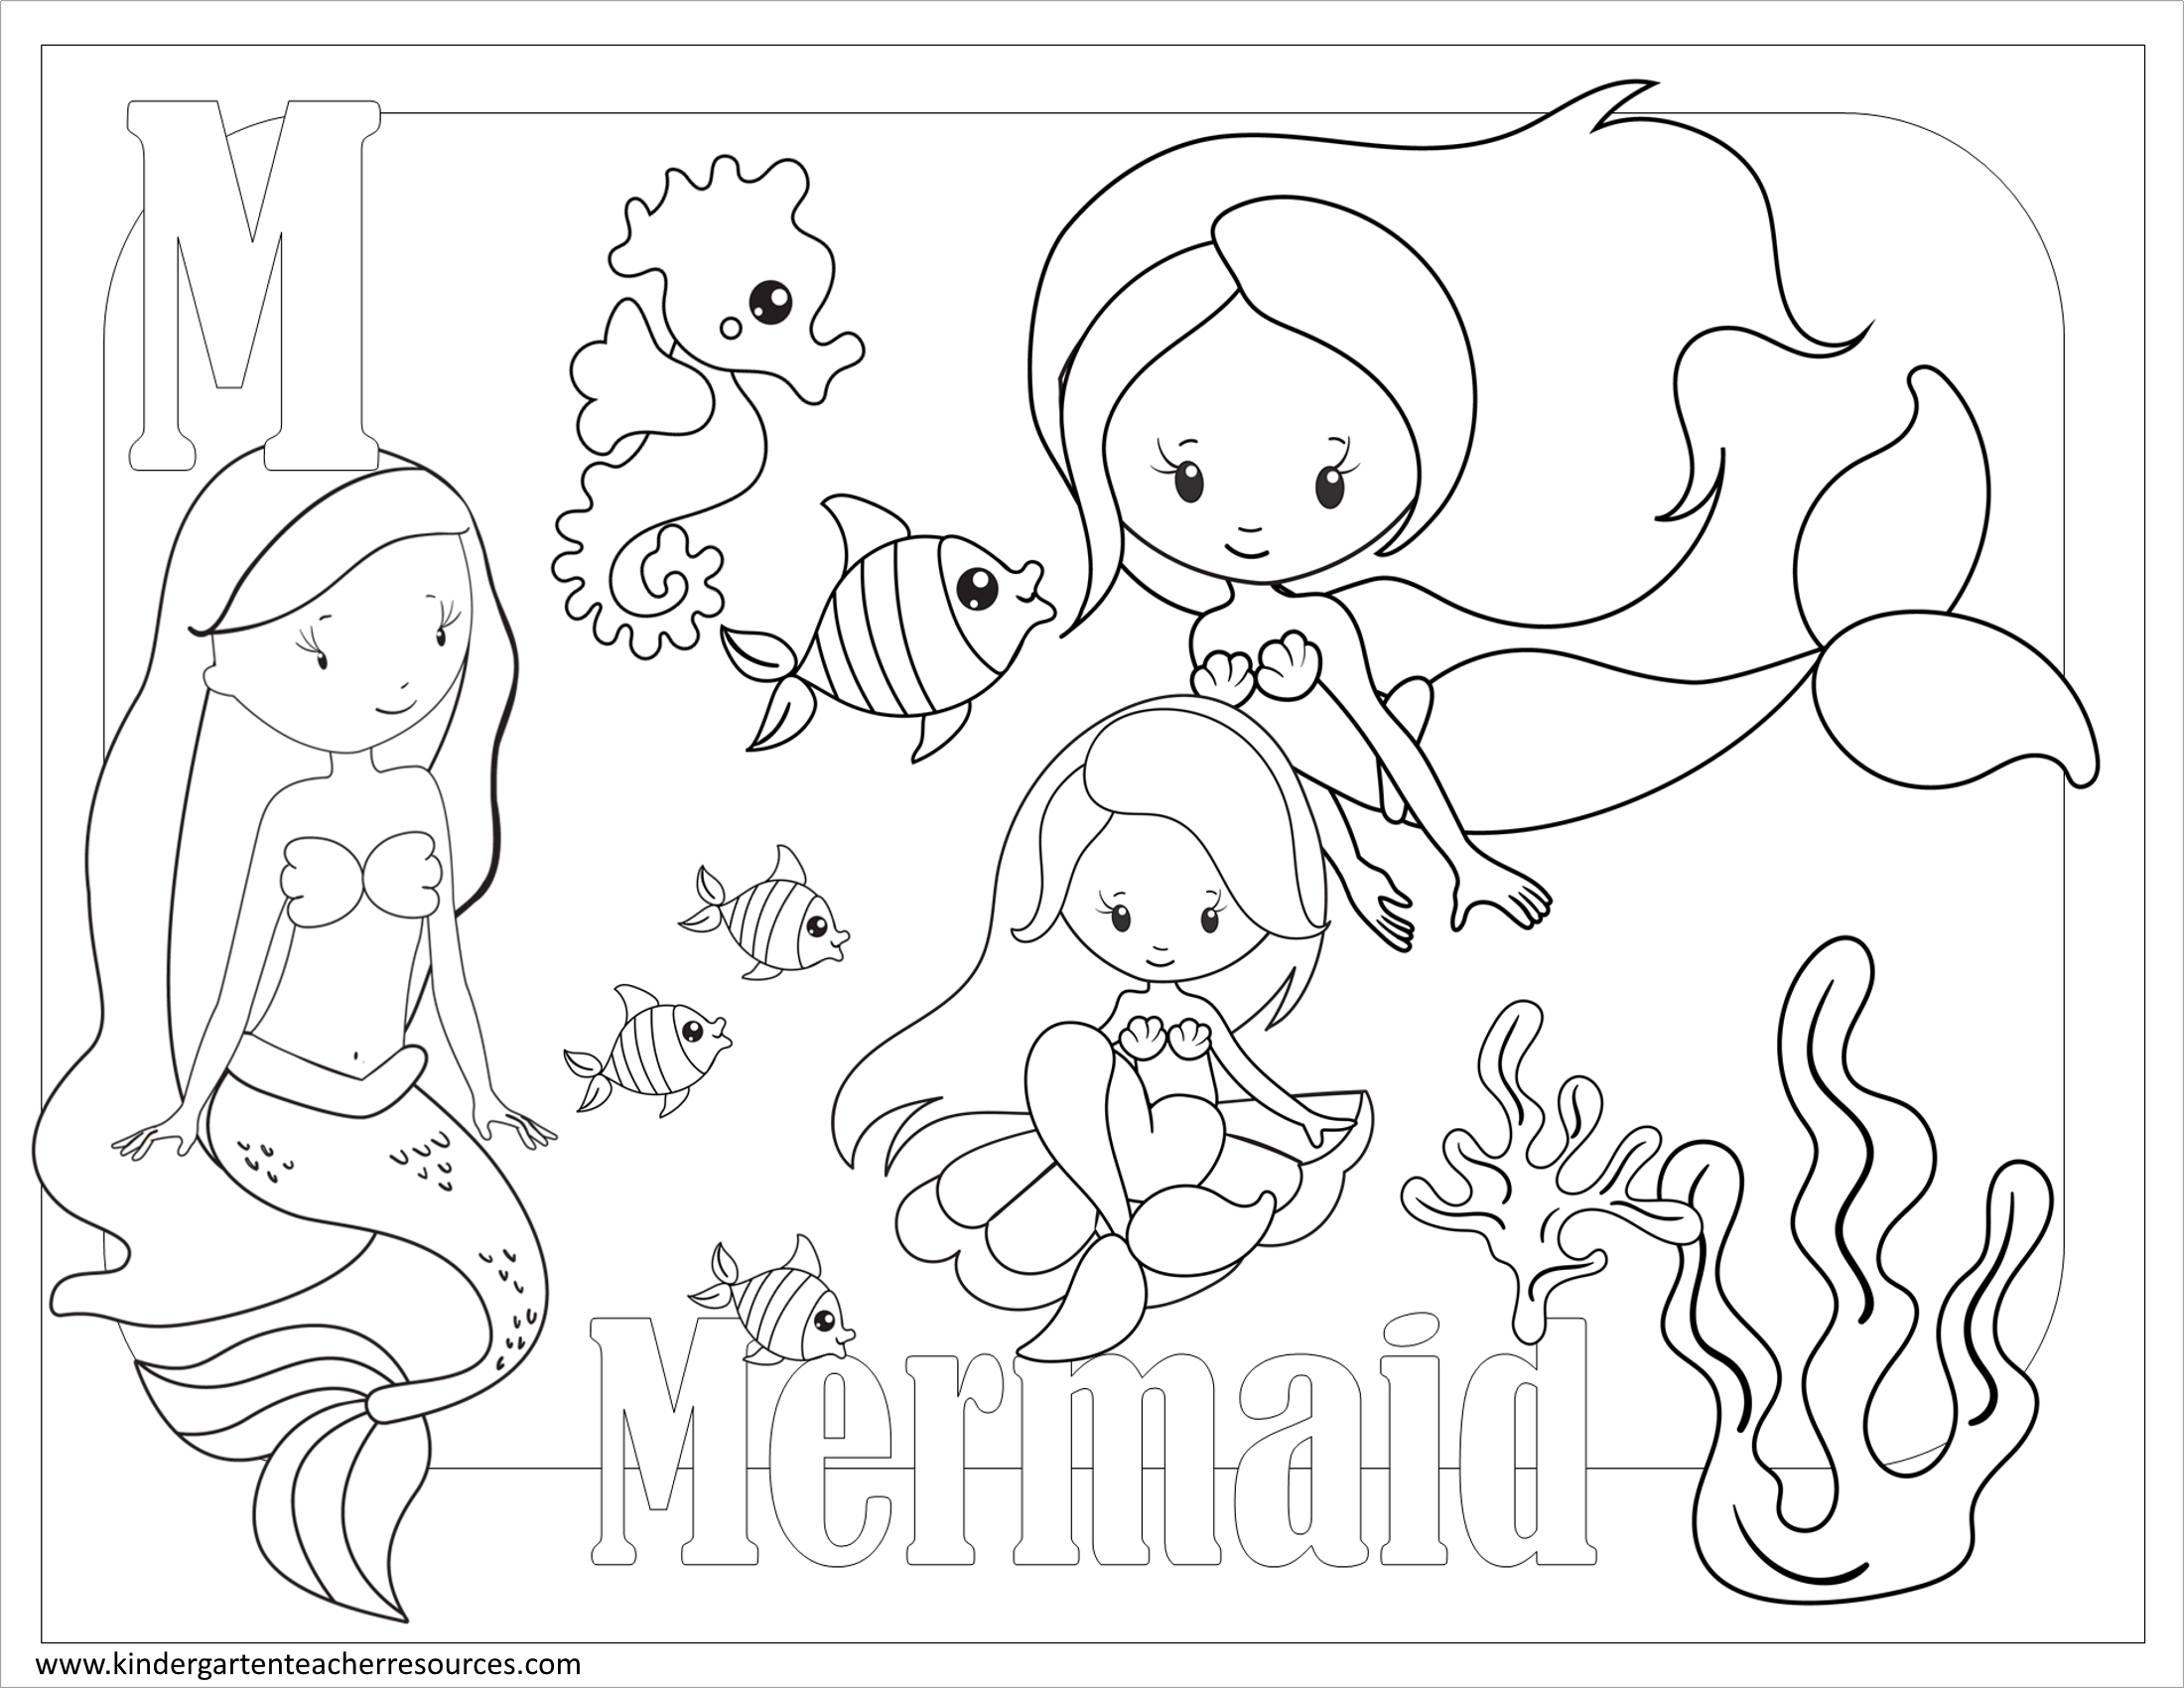 Download Free Printable Coloring Pages for Kindergarten